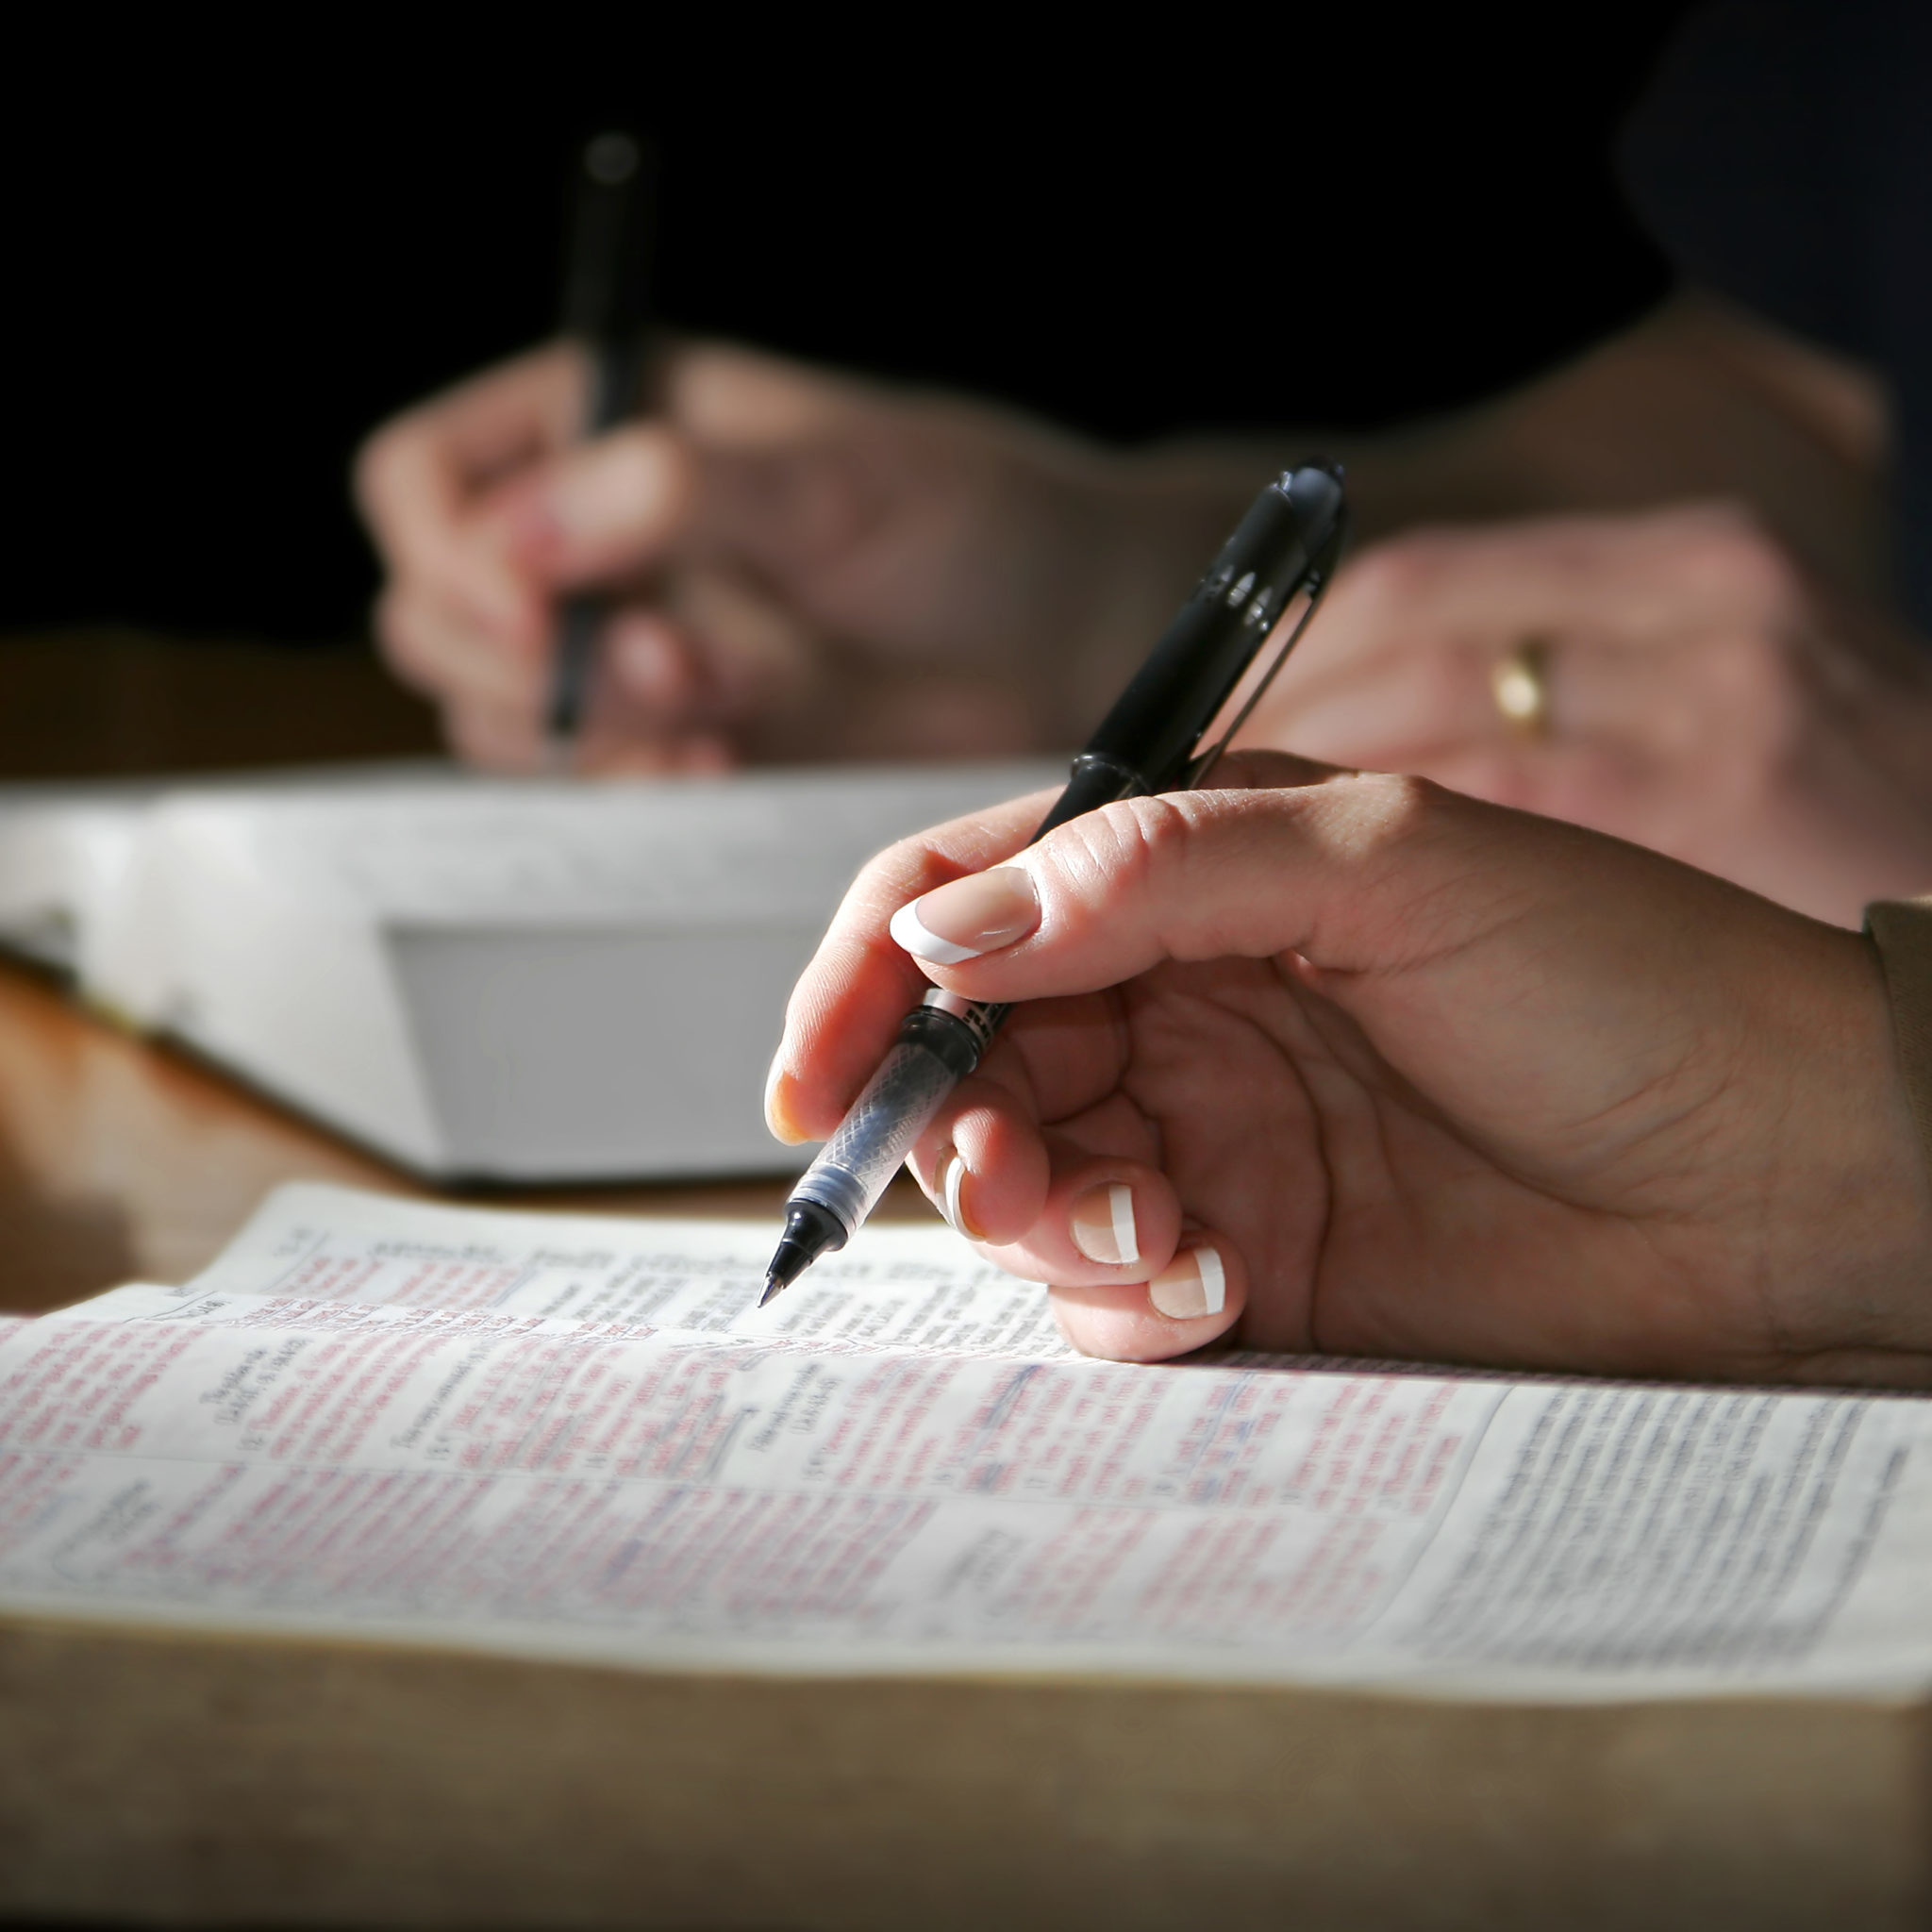 The hands of a couple are highlighted as they study the Holy Bible together - focus point on the woman's foreground hand.